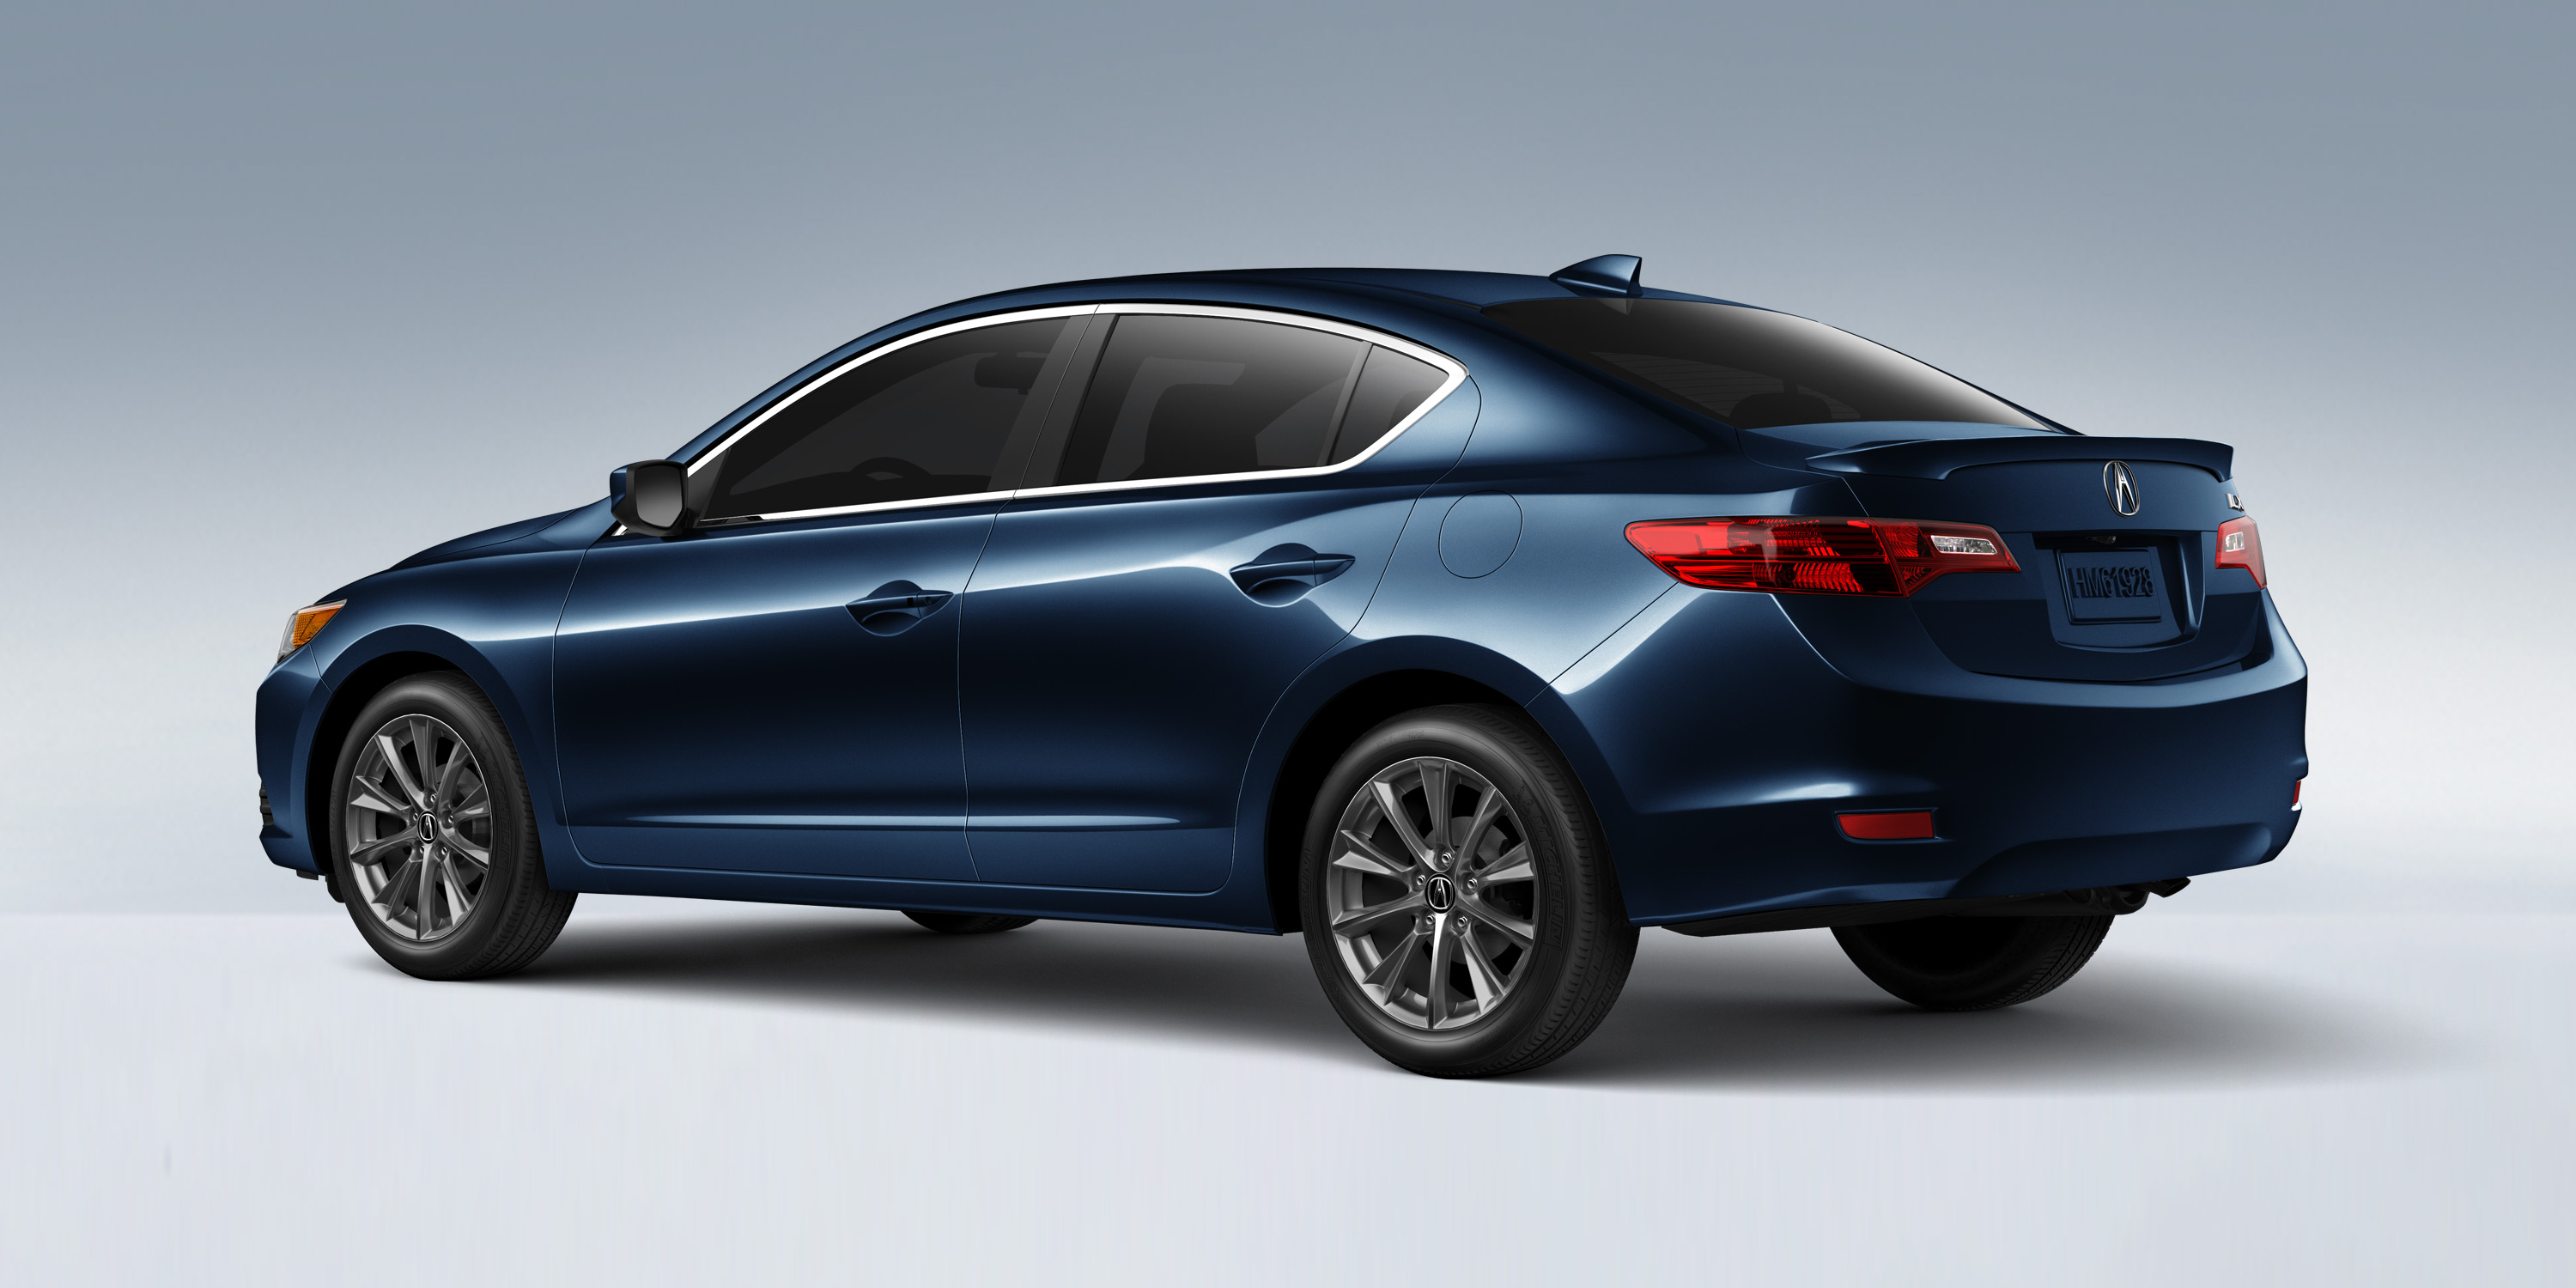 2014 Acura ILX Now on Sale | Butler Auto Group's Blog